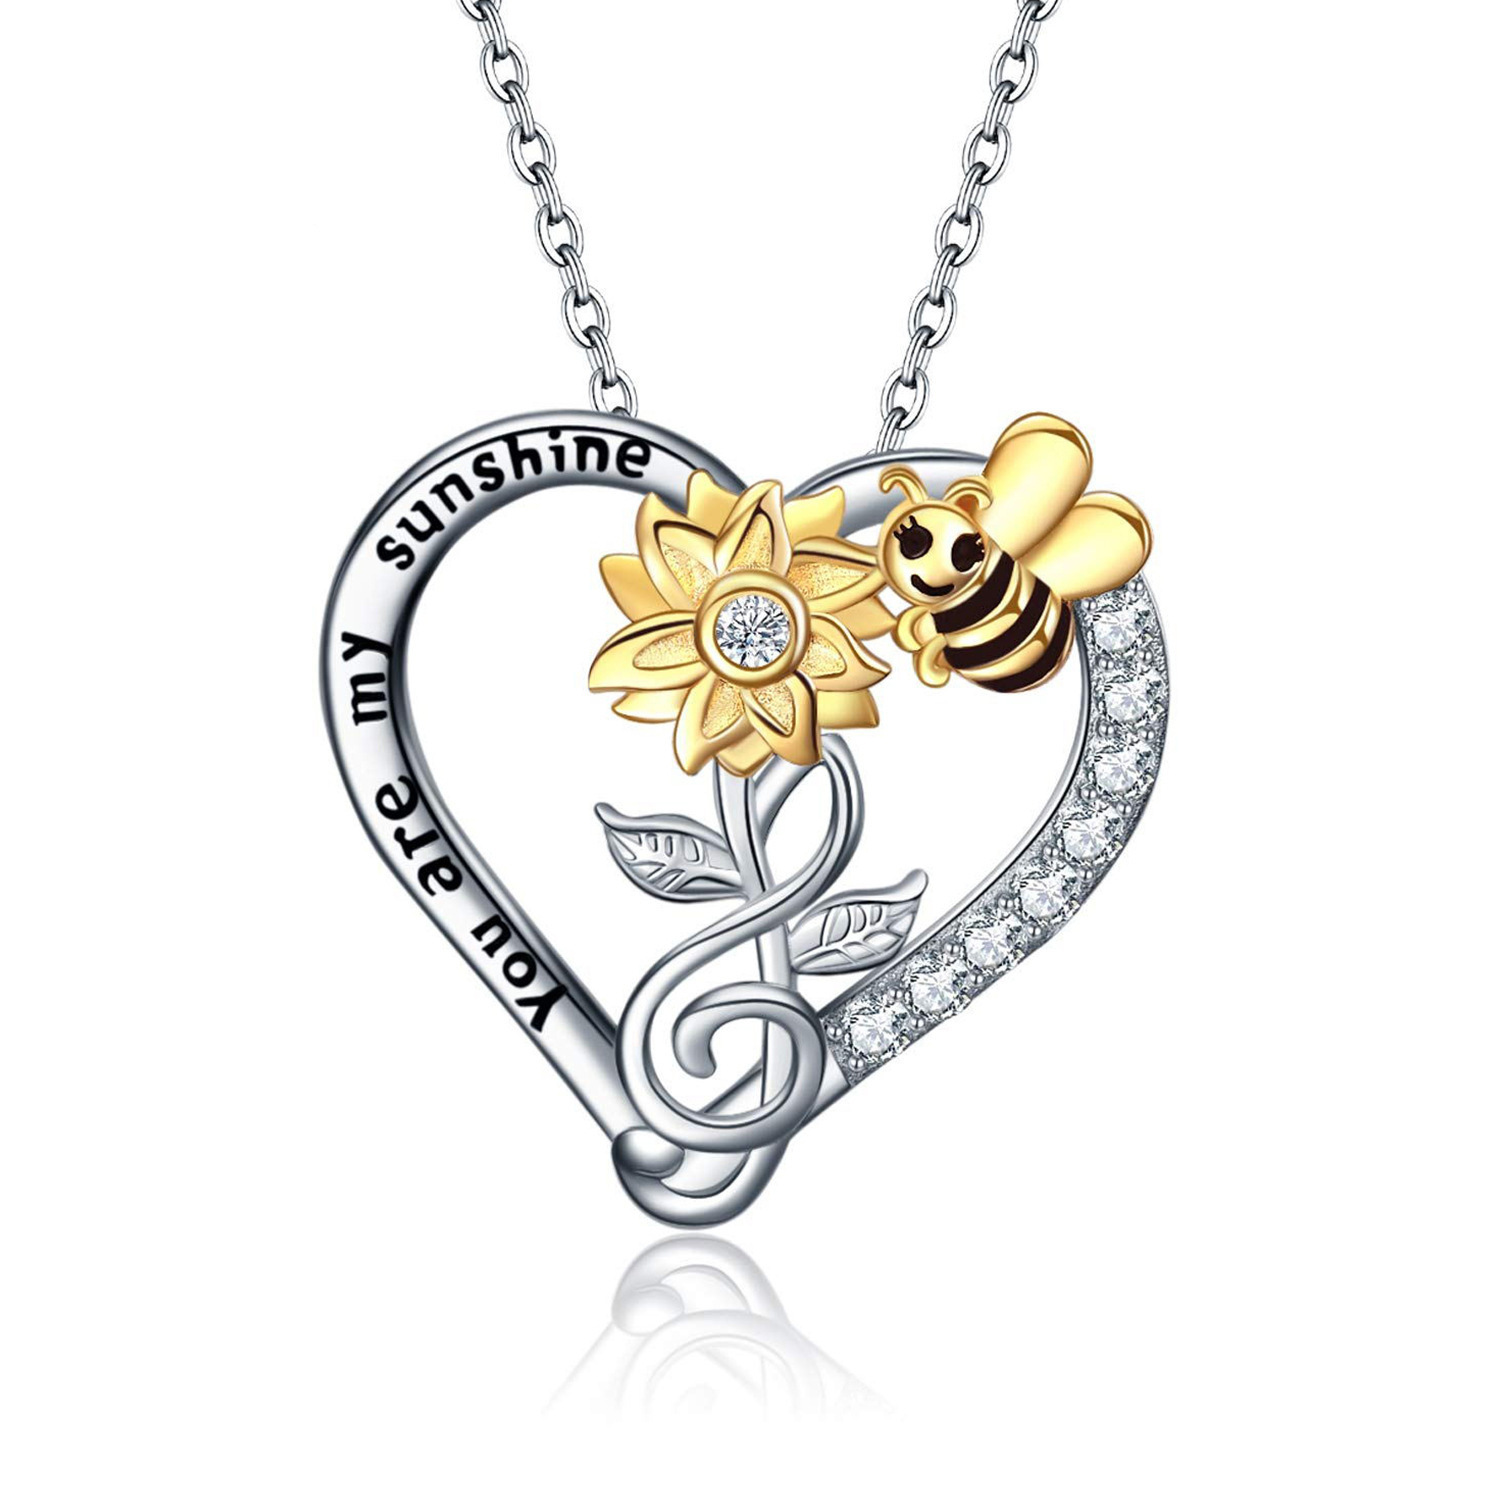 Valentines Day Charm - Choose from Silver or Gold-Plate